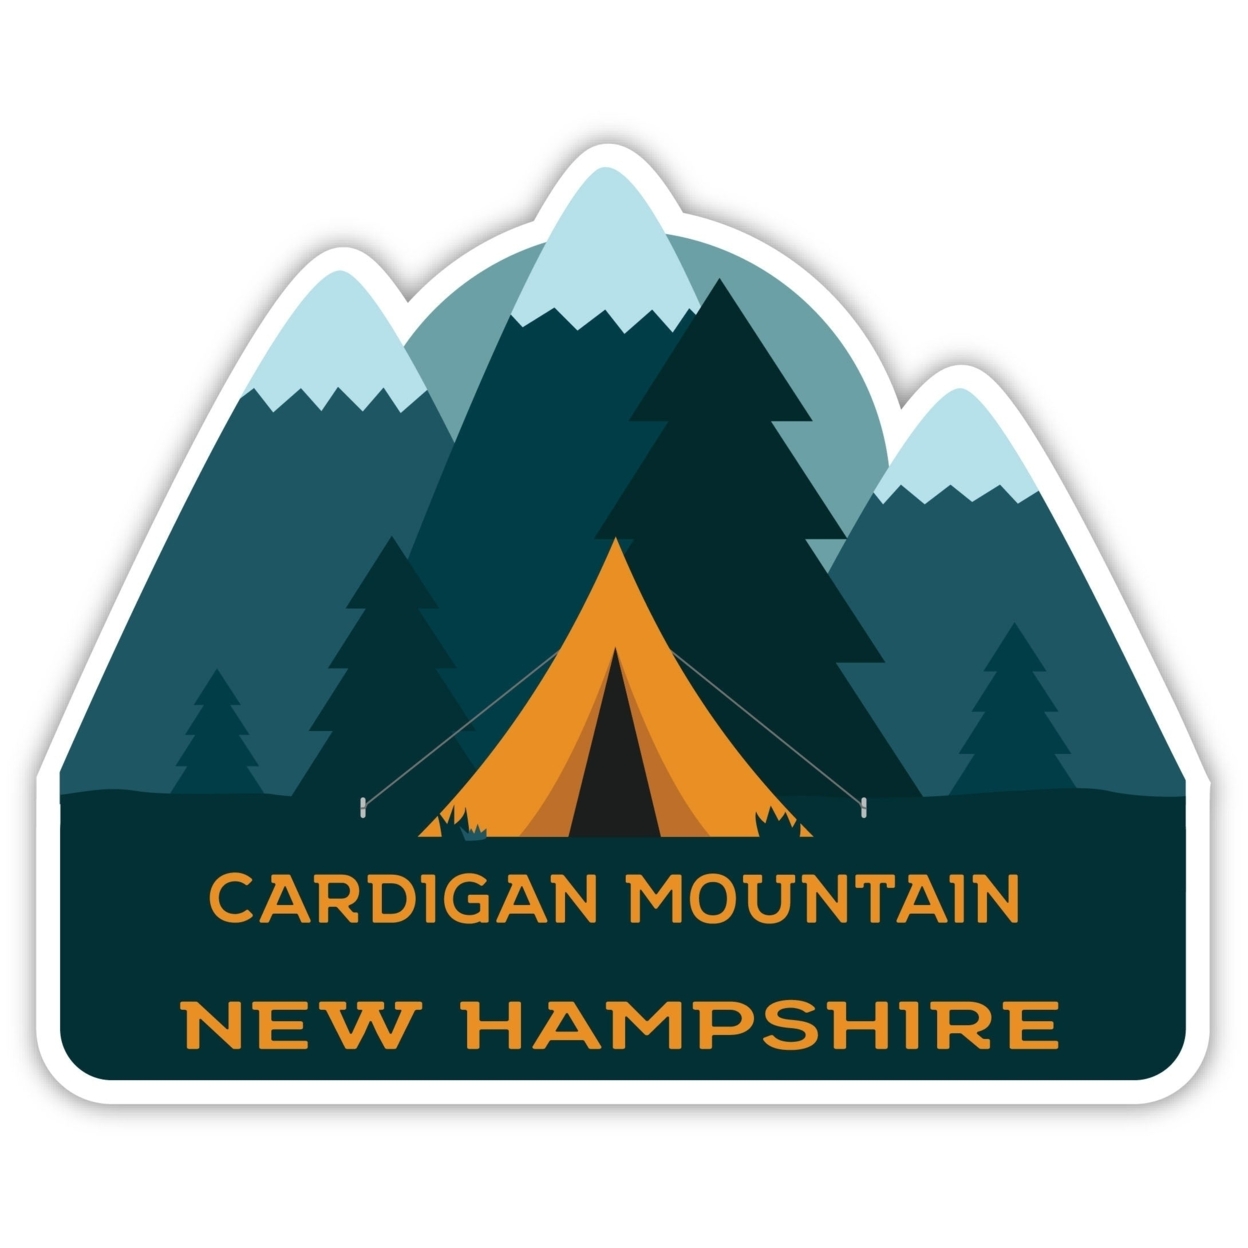 Cardigan Mountain New Hampshire Souvenir Decorative Stickers (Choose Theme And Size) - 4-Pack, 4-Inch, Tent